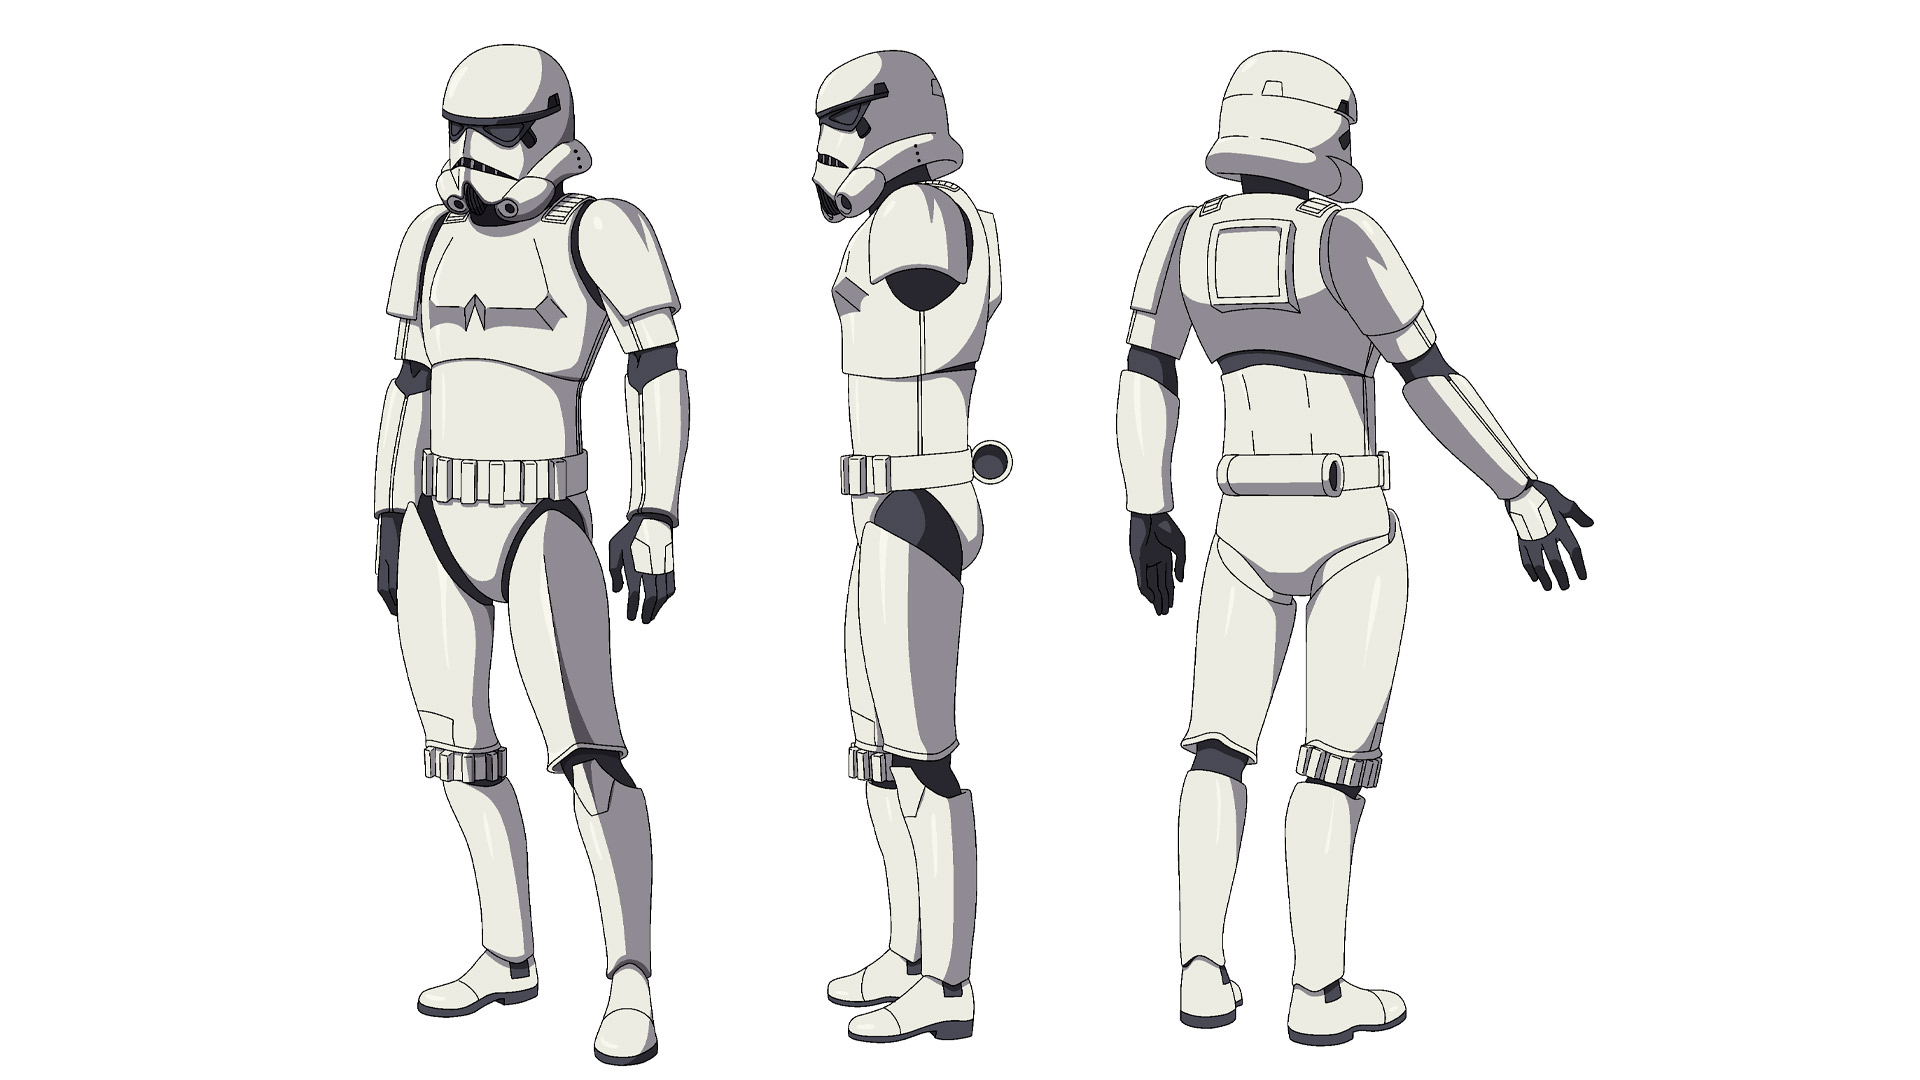 Concept art of Stormtroopers from 